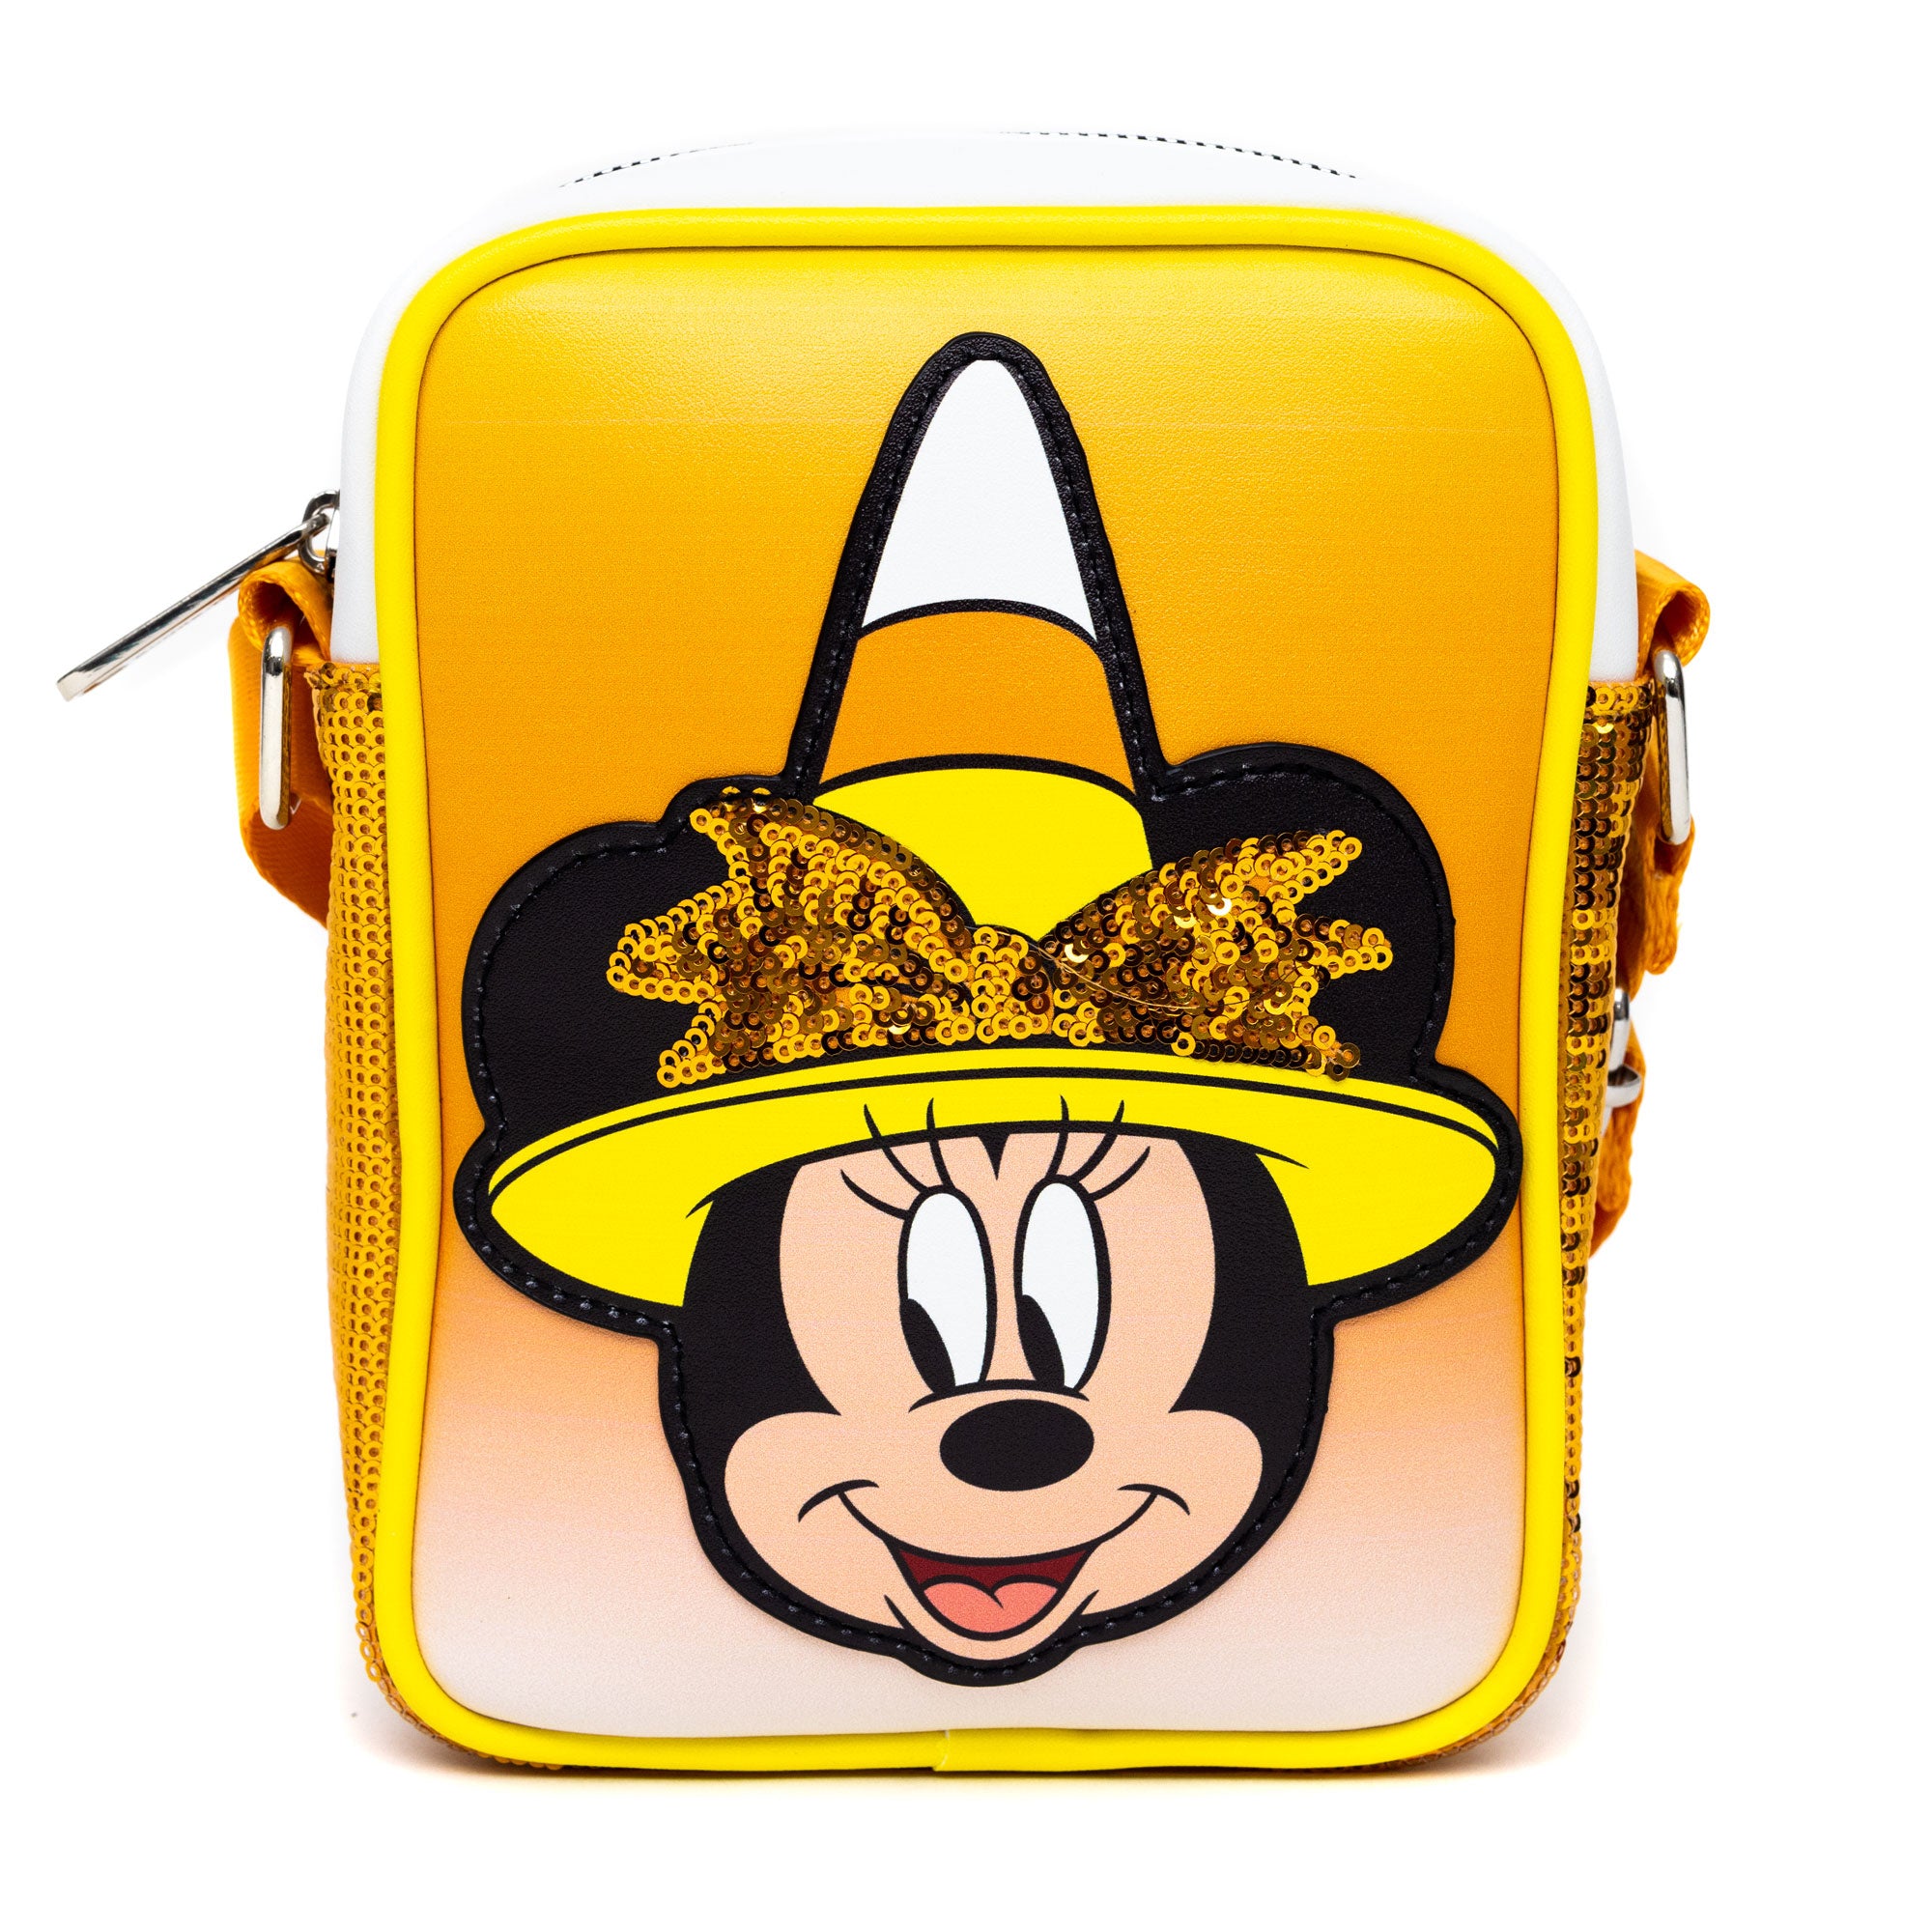 Disney Candy Corn Ombre Minnie Mouse Crossbody Bag